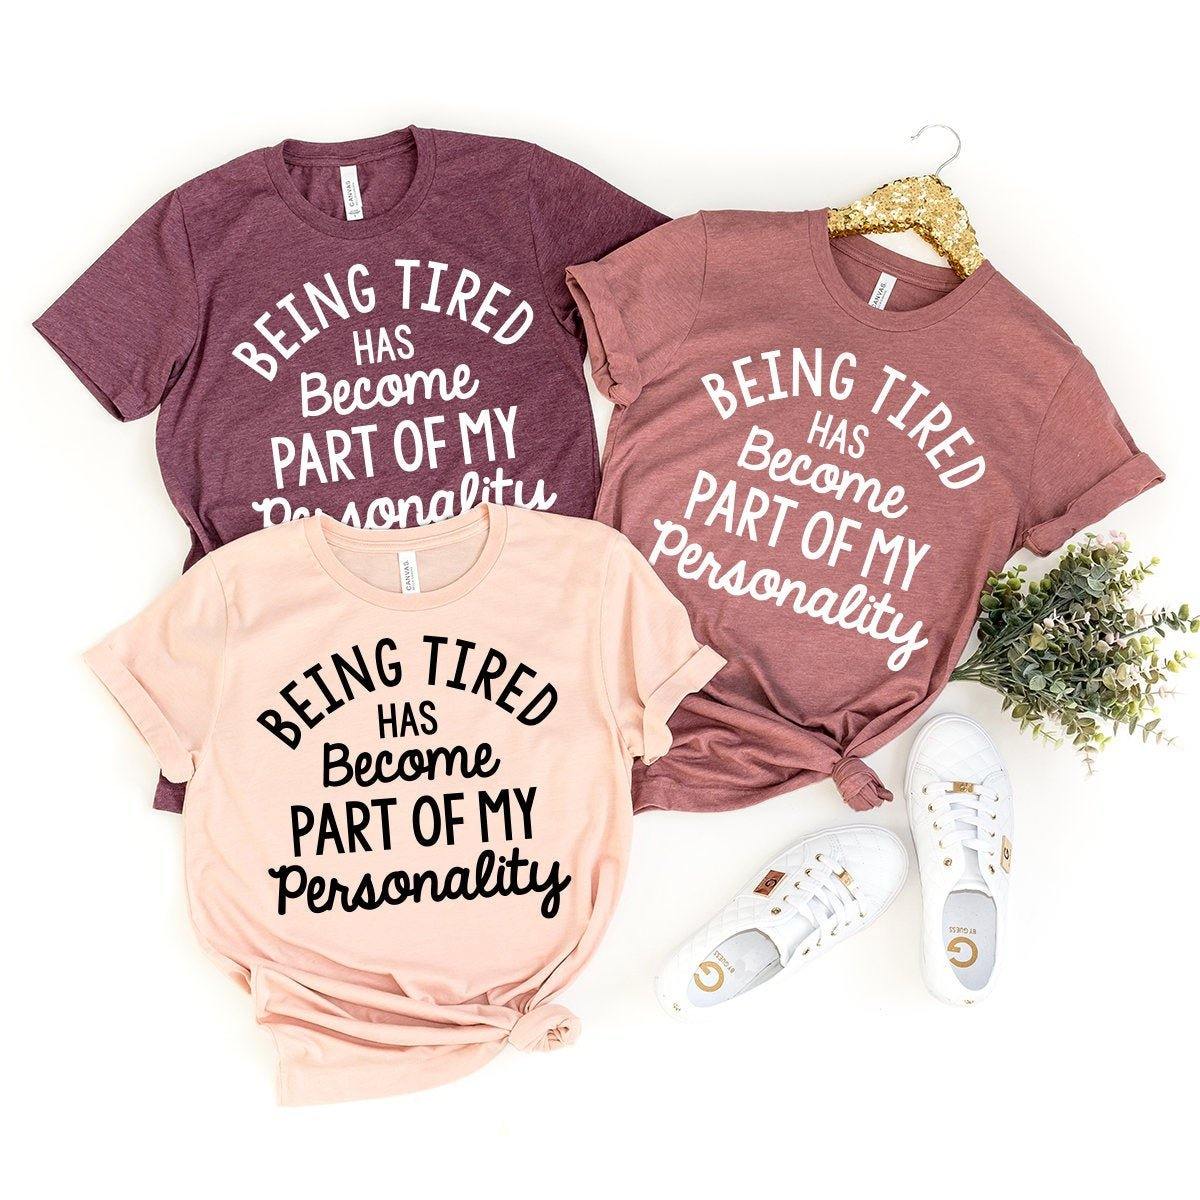 New Mom Shirt, Tired Mom T-Shirt, Funny Sarcastic Tee, Sarcastic Shirt, Sarcasm Shirt, Being Tired Has Become Part of My Personality T Shirt